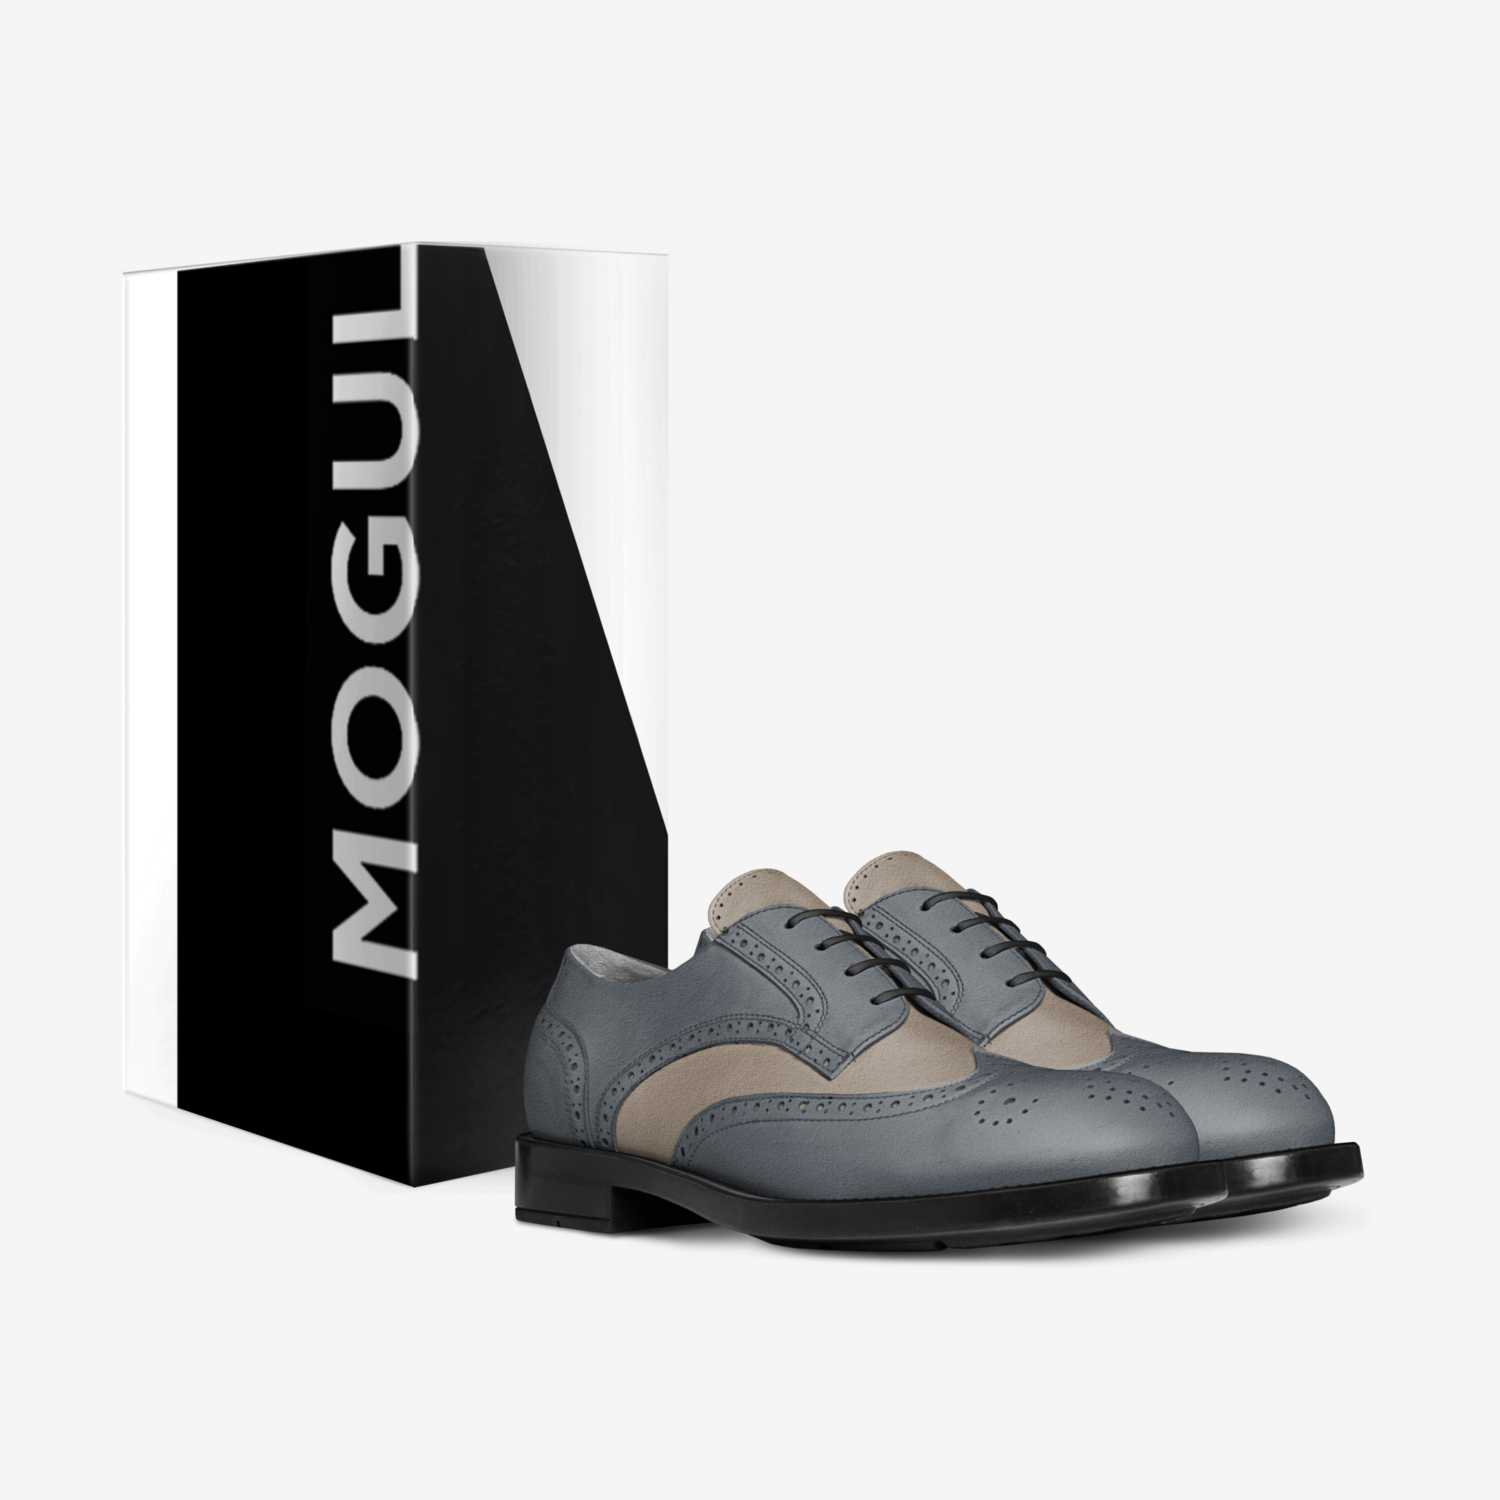 MOGUL custom made in Italy shoes by Patrick Collins | Box view